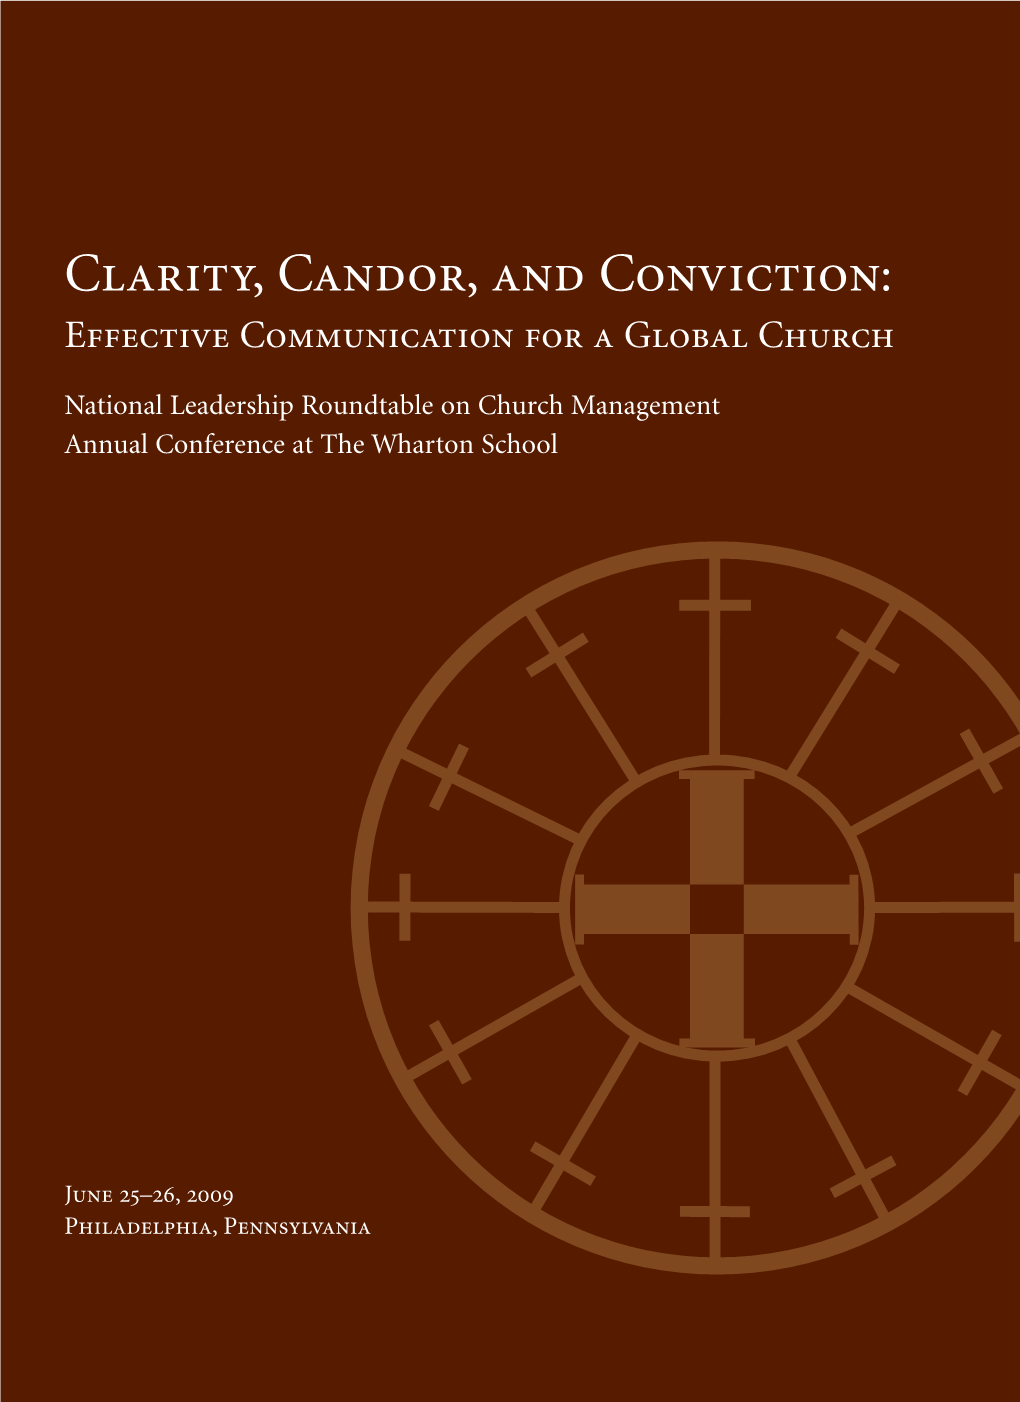 Clarity, Candor and Conviction: Effective Communications for a Global Church